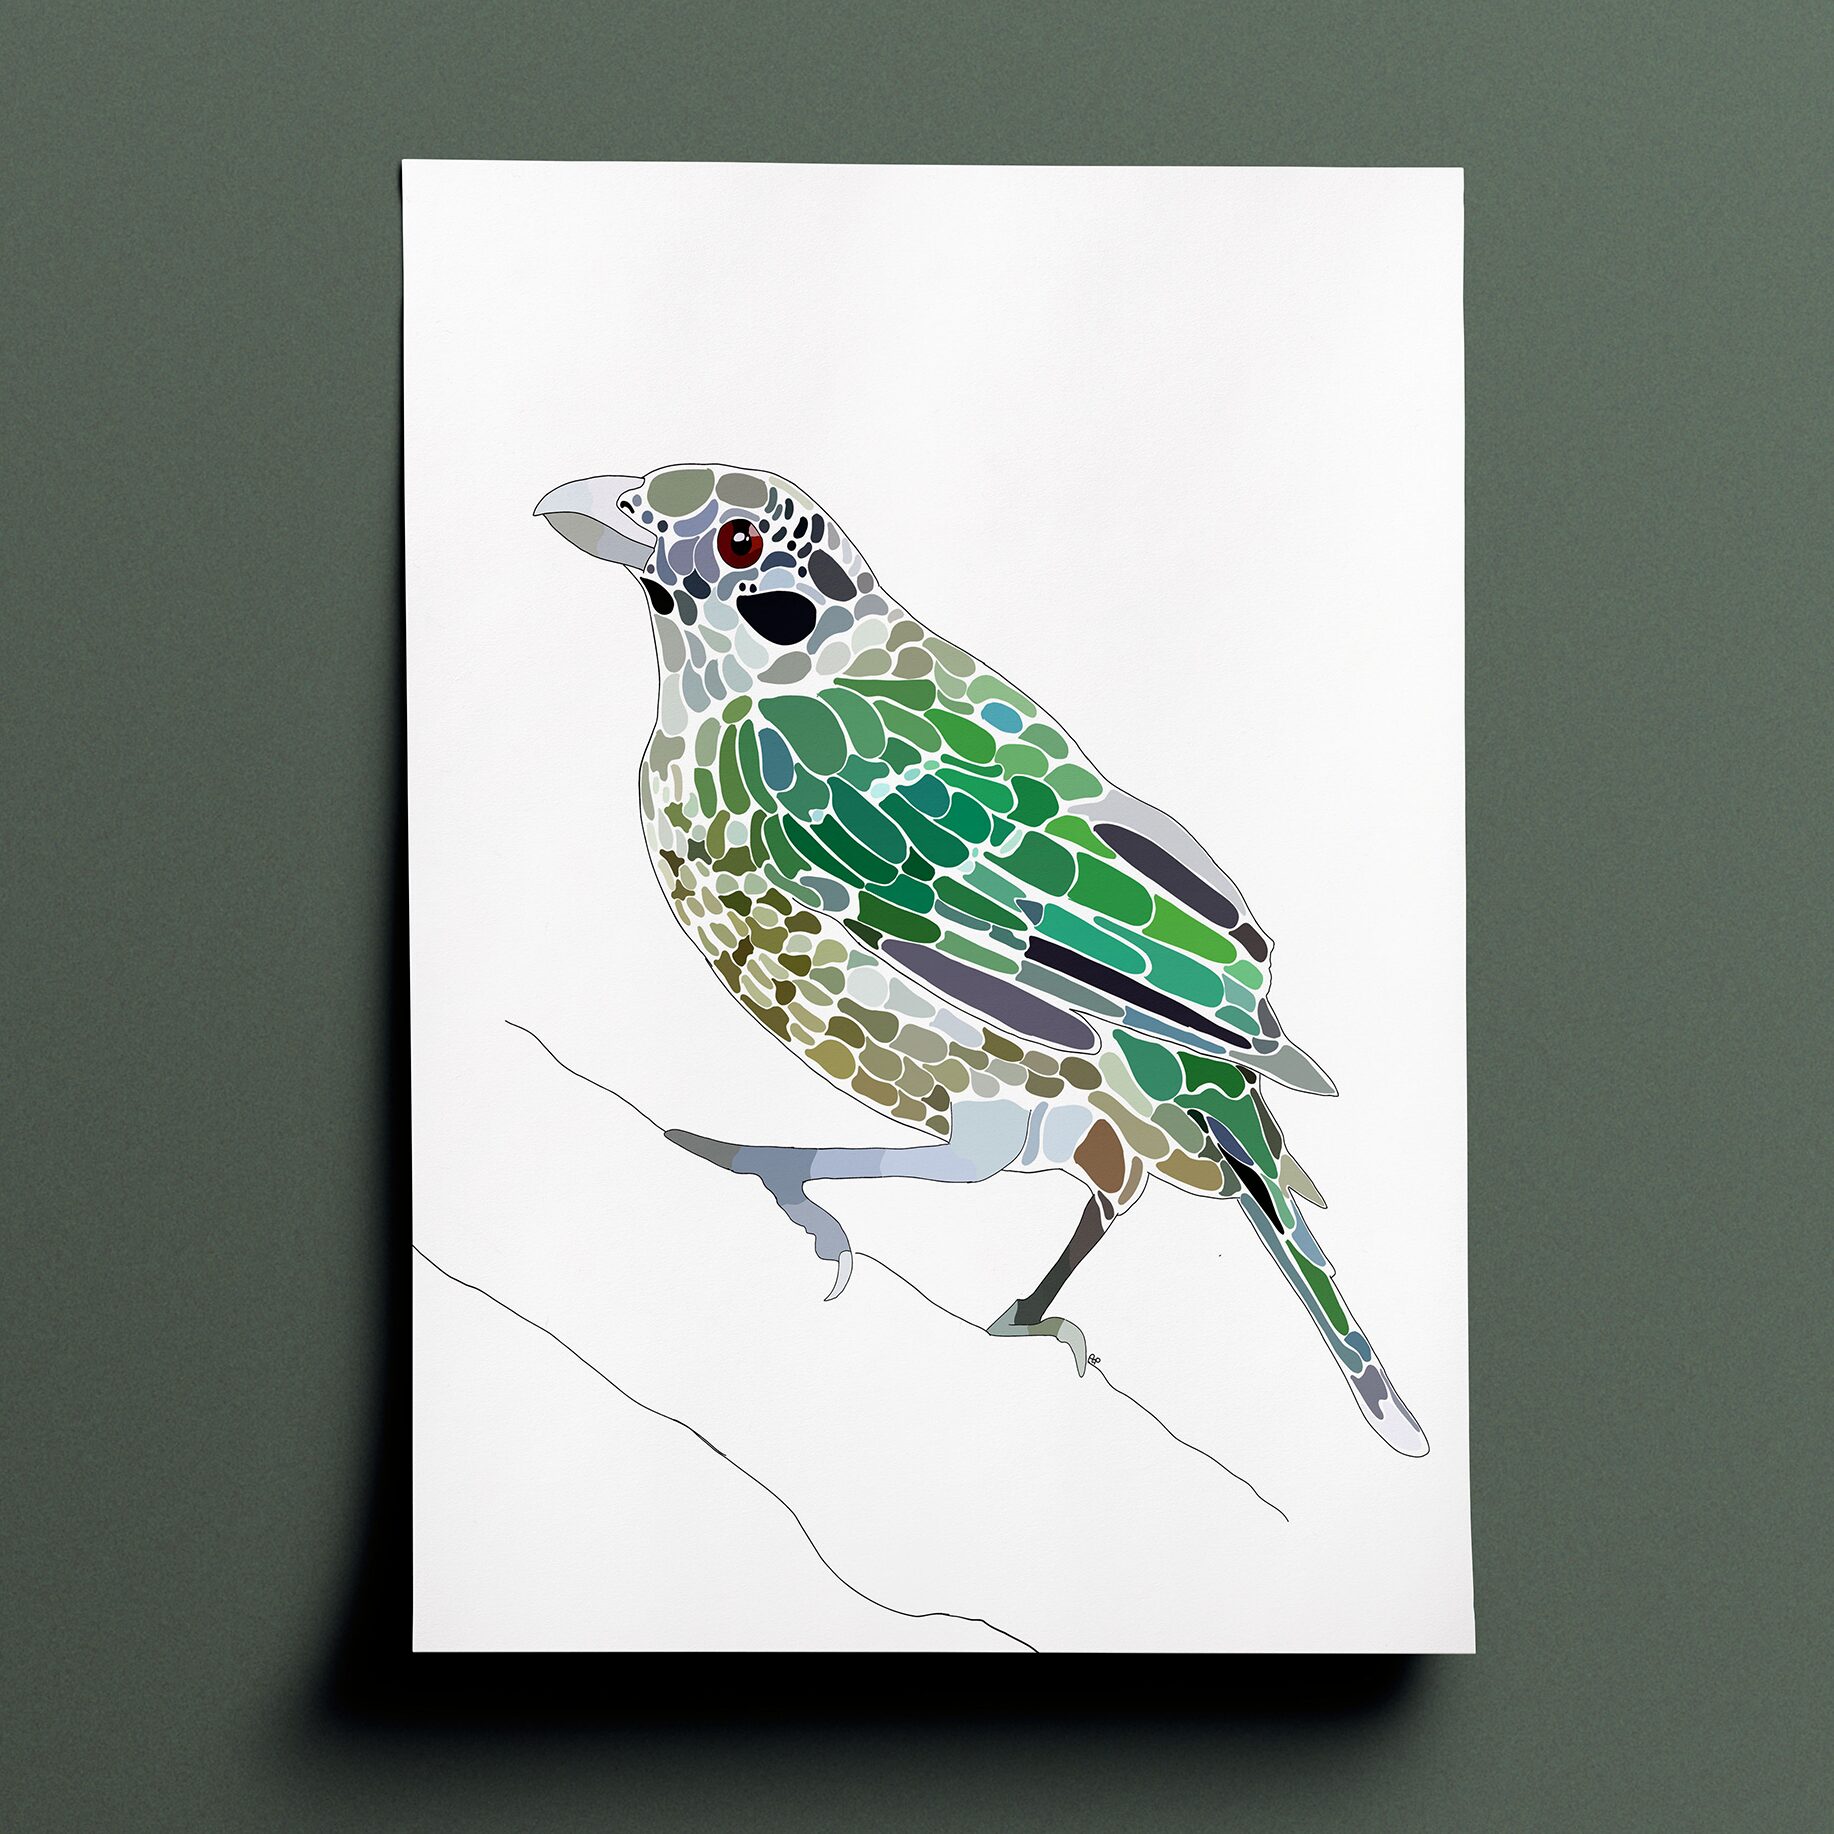 Amelia's interpenetration and vision of a spotted catbird in the various shades of green and grey done in a terrazzo type style. The drawing is a side view of the bird perched on a branch who is facing to the left of the page.